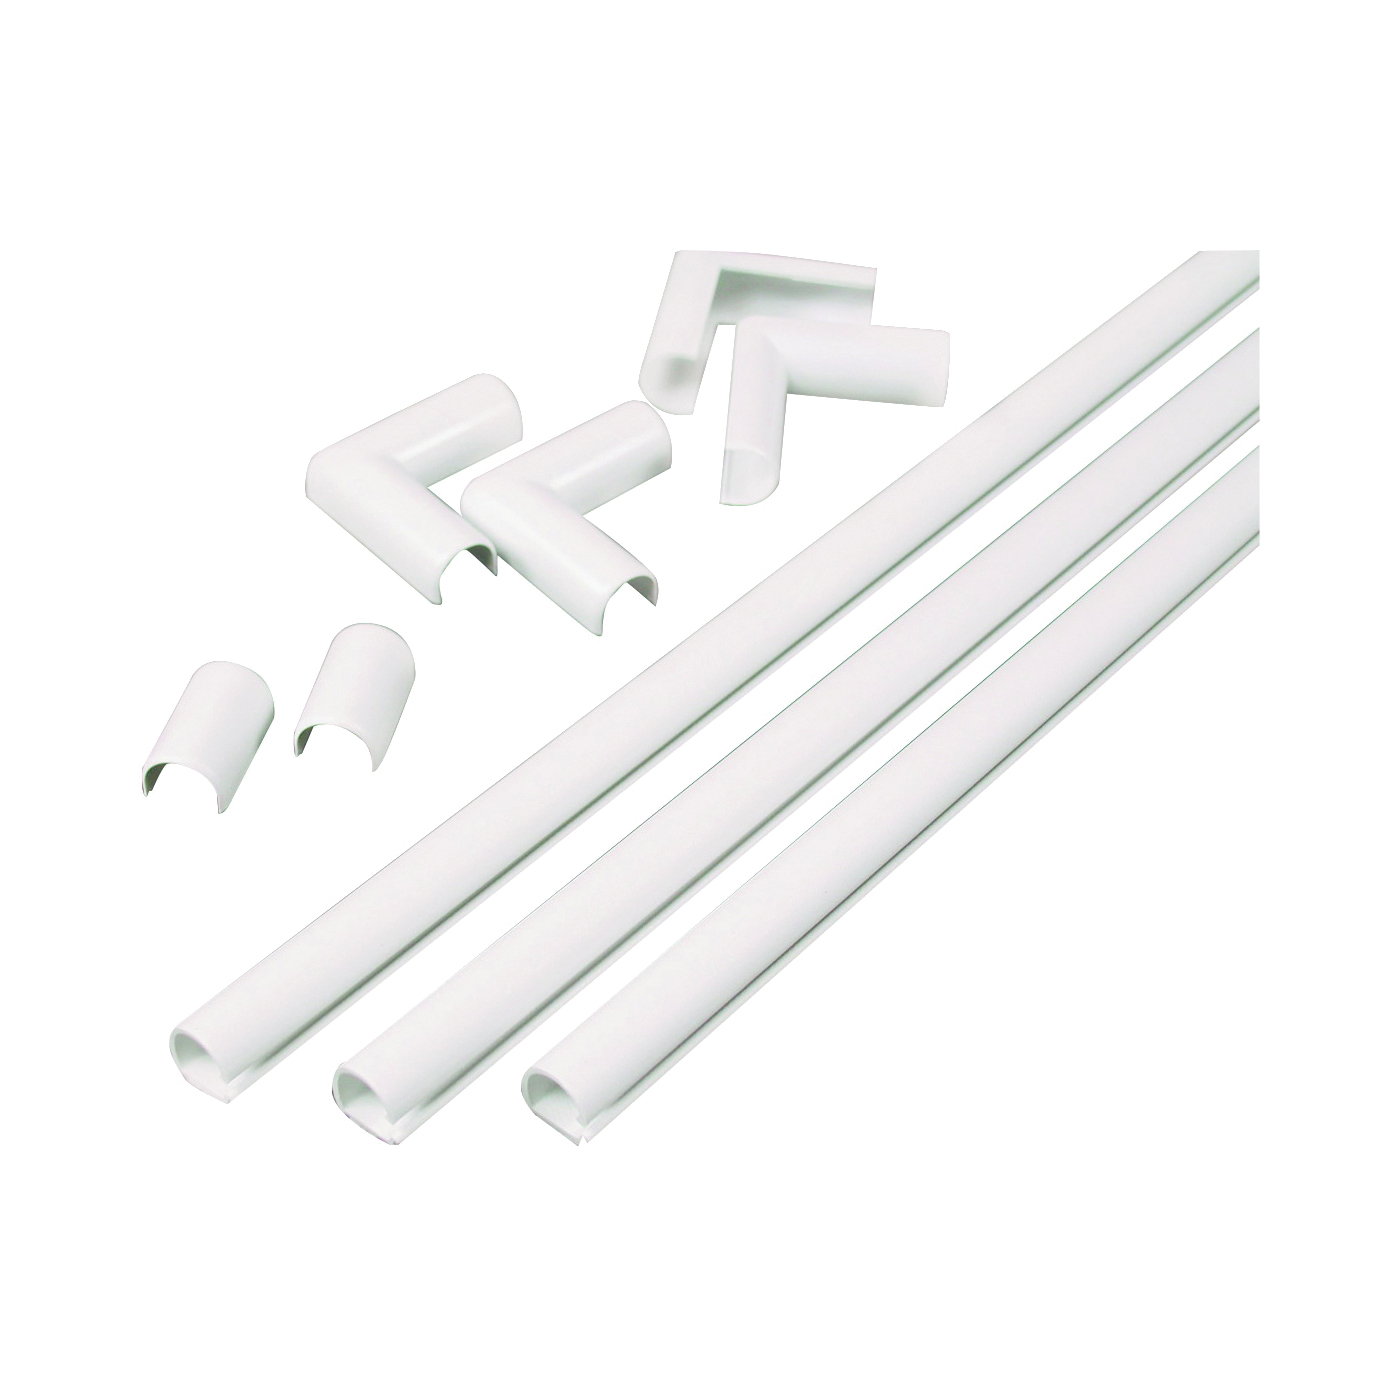 Cordmate II White Cord Cover Kit - Pecos, TX - Gibson's Hardware and Lumber